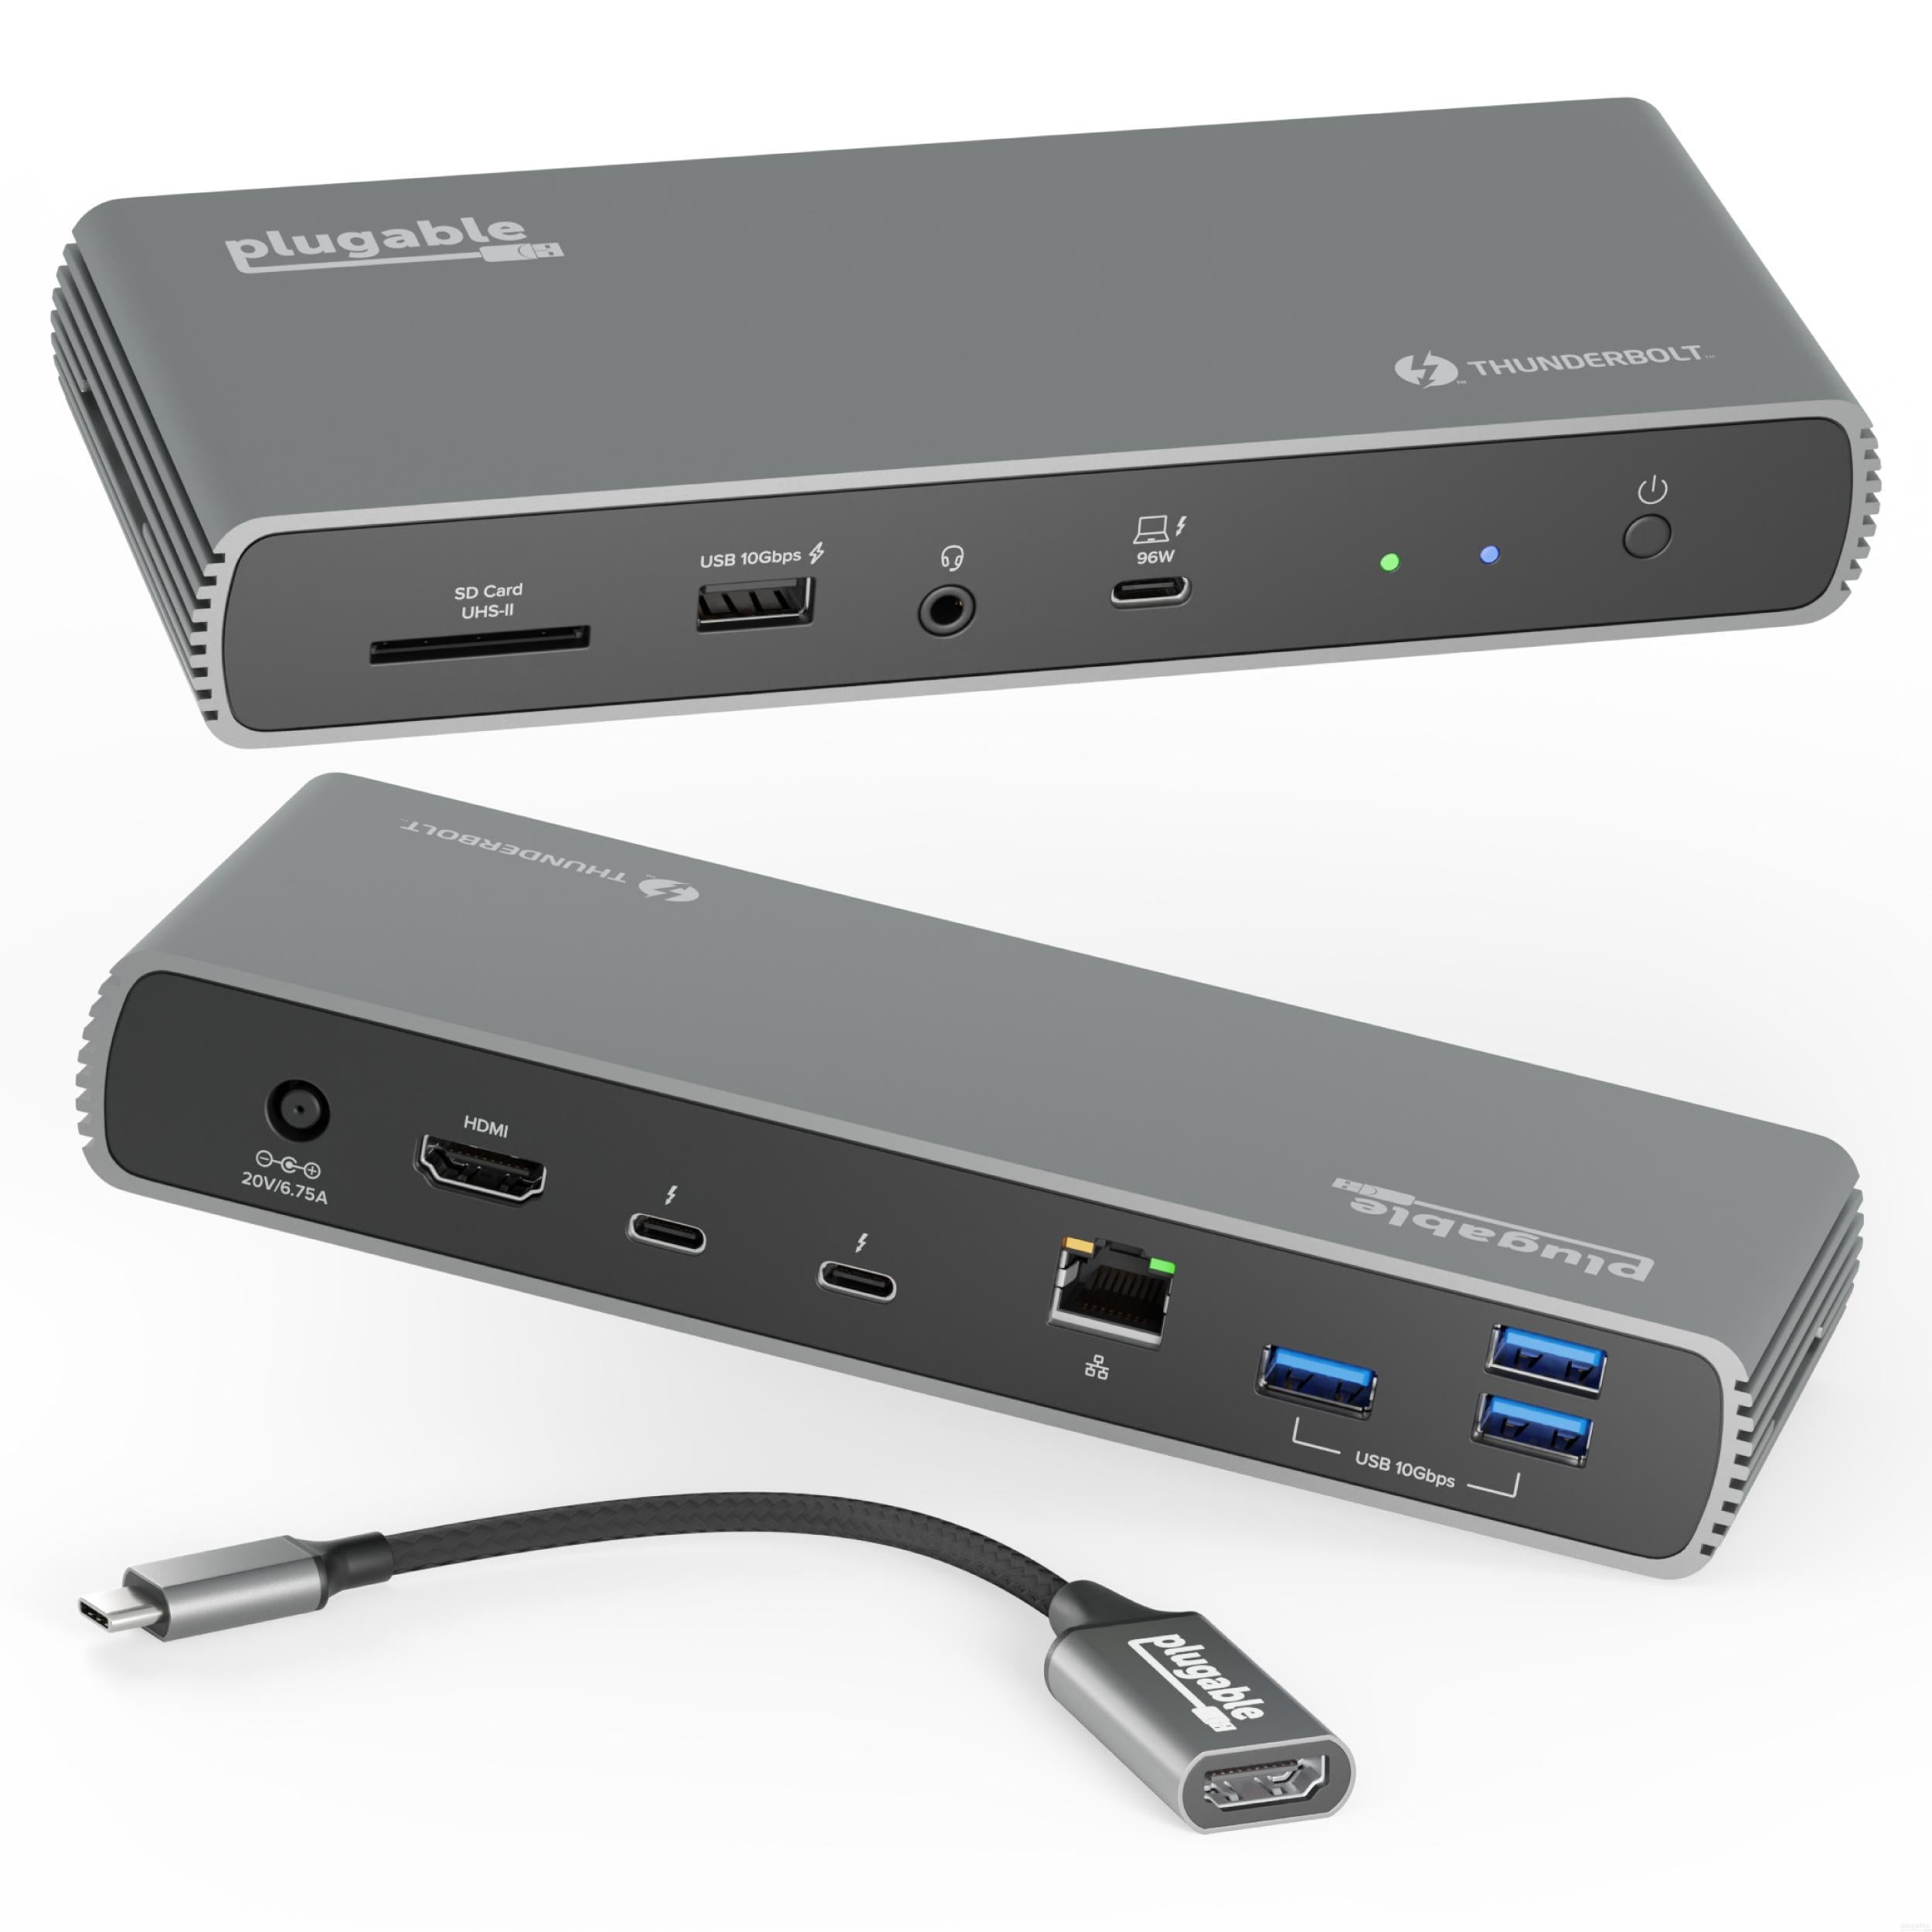 Plugable Thunderbolt 3 Dock, Enables Extra Displays, Wired Network, Audio,  and More USB Ports, Compatible with Thunderbolt 3 Macs and PCs (4K